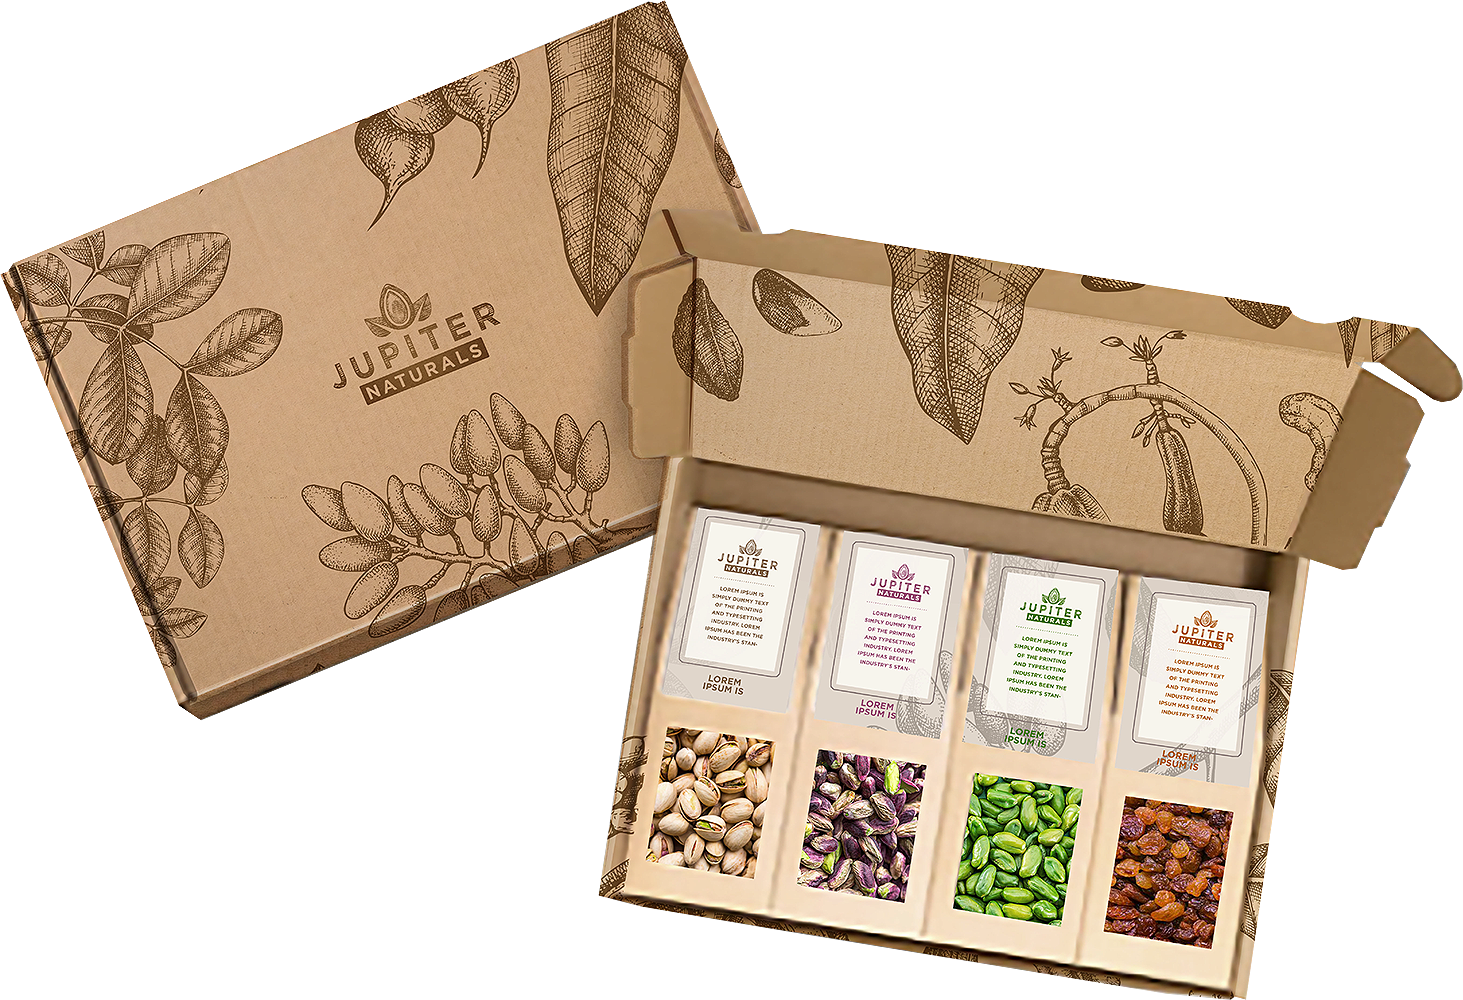 Premium nuts and dried fruits wholesaler